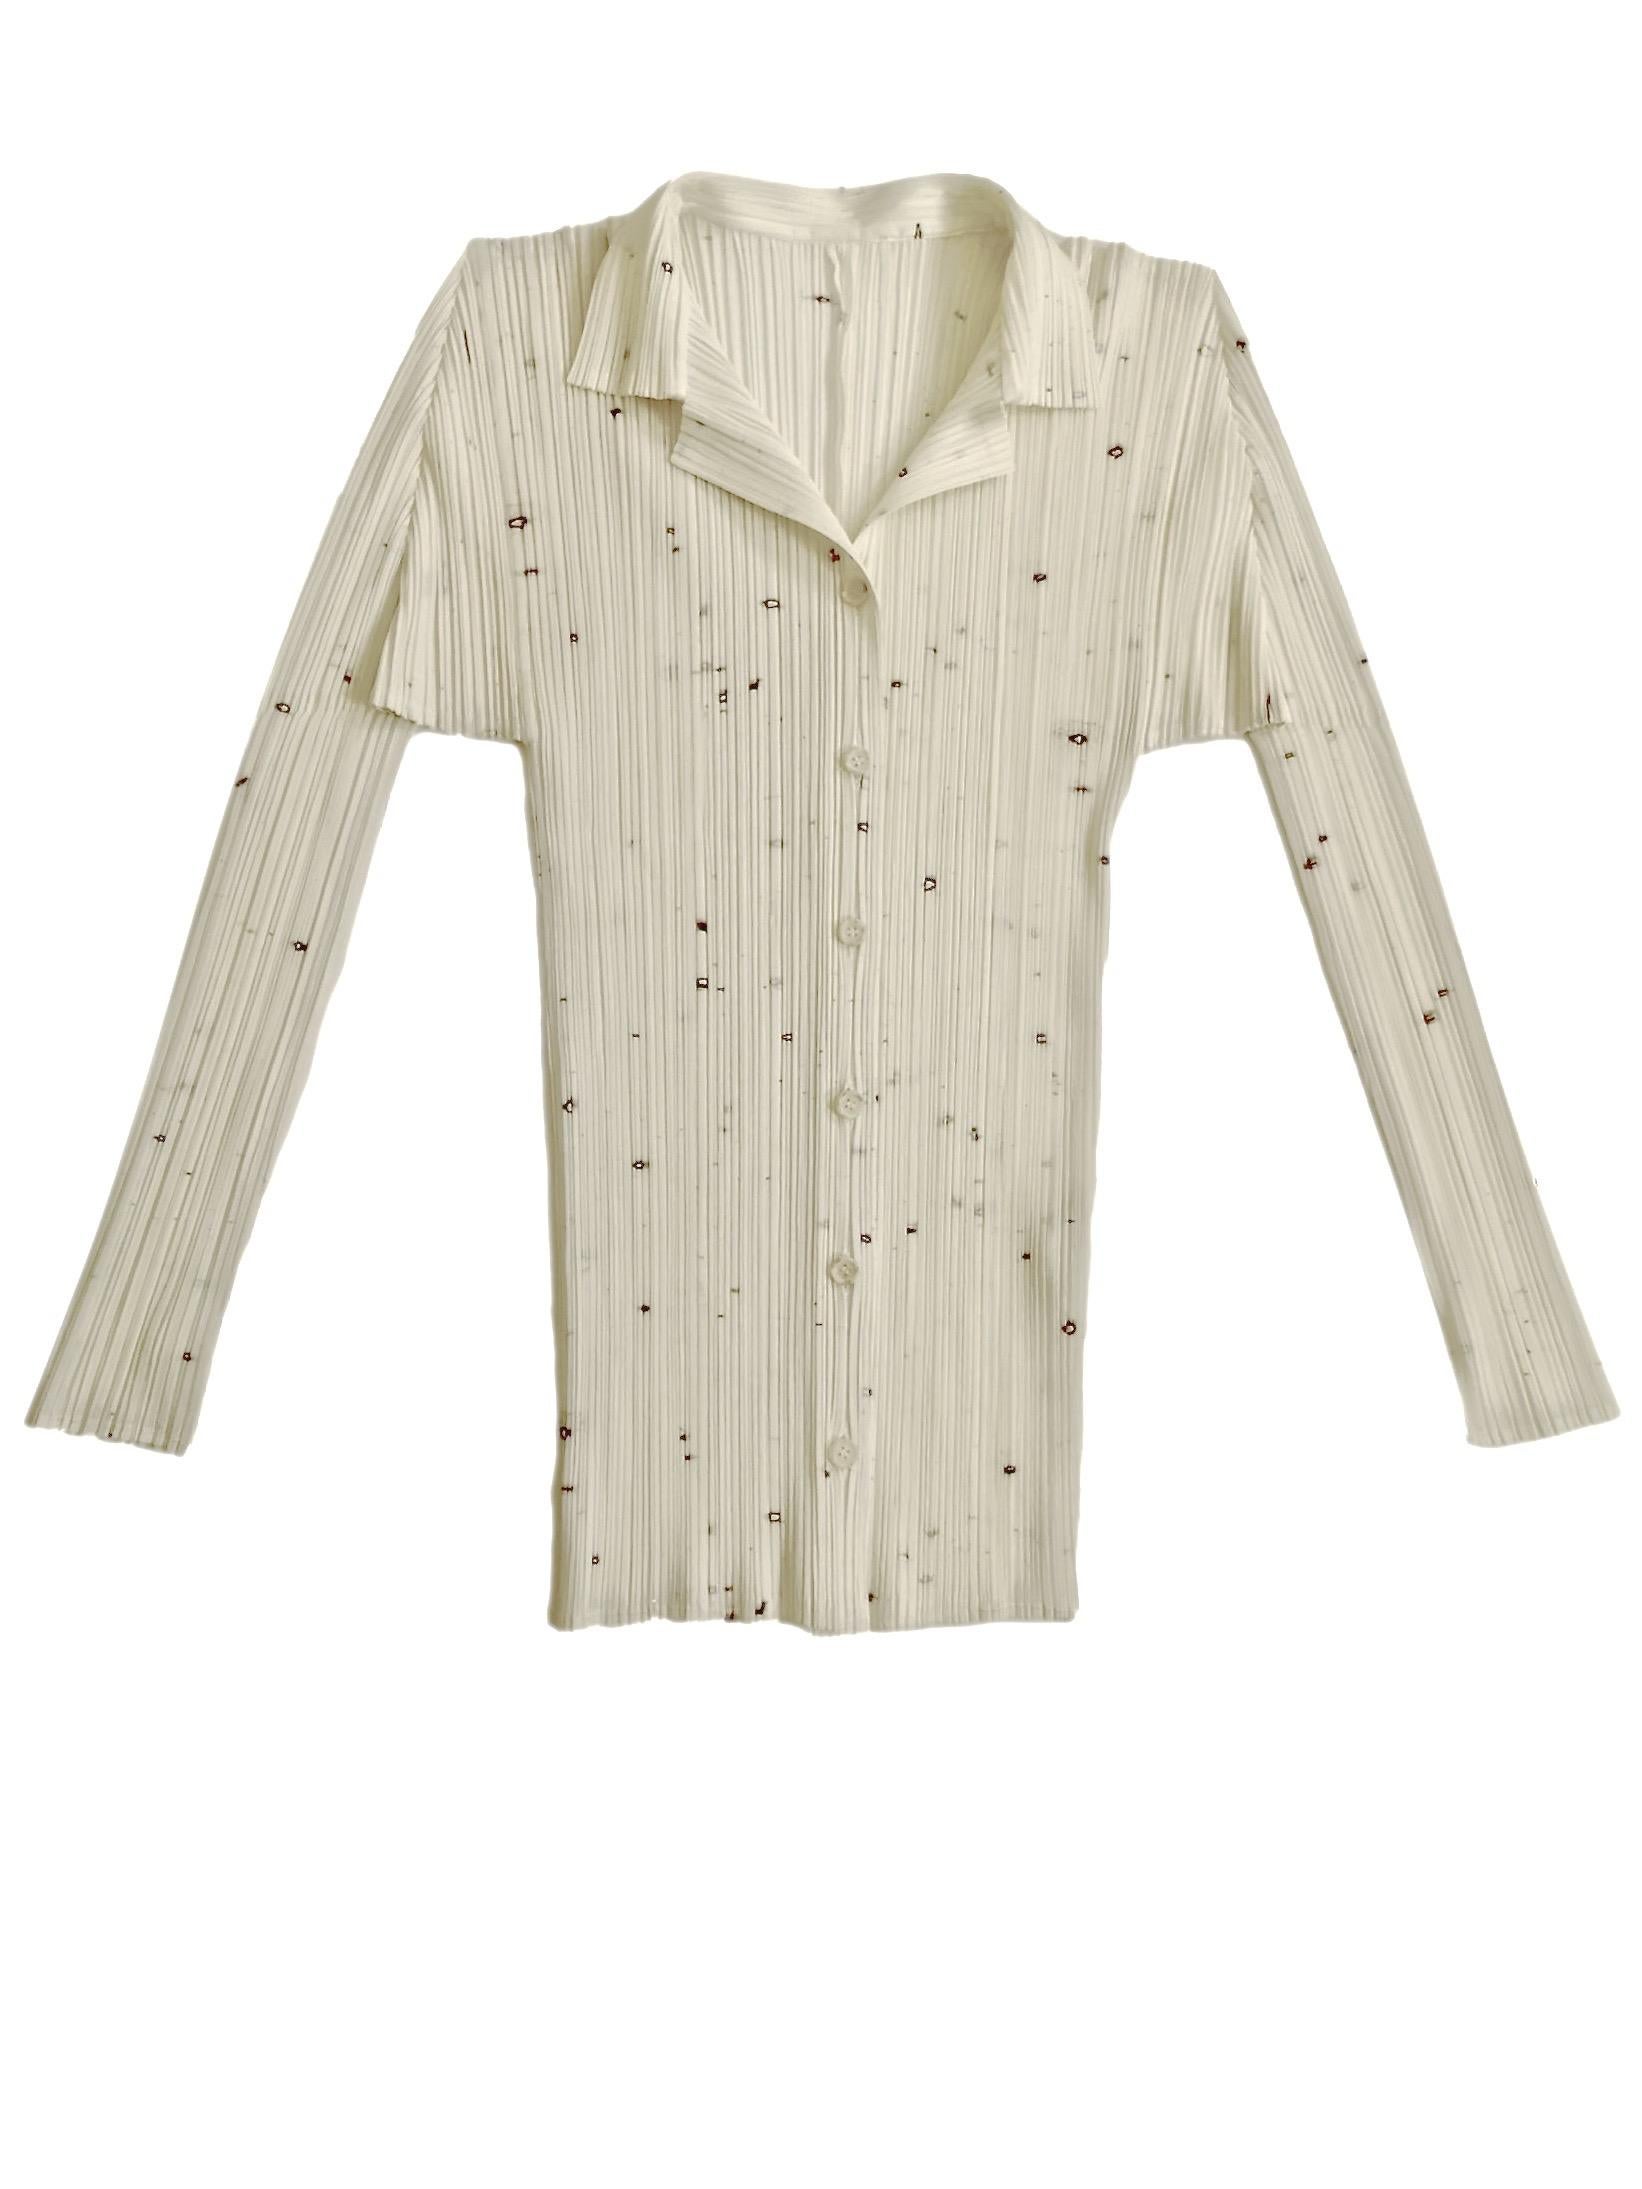 Women's Issey Miyake Guest Artist Series 4 Cai Guo Qiang Pleats Please Shirt For Sale